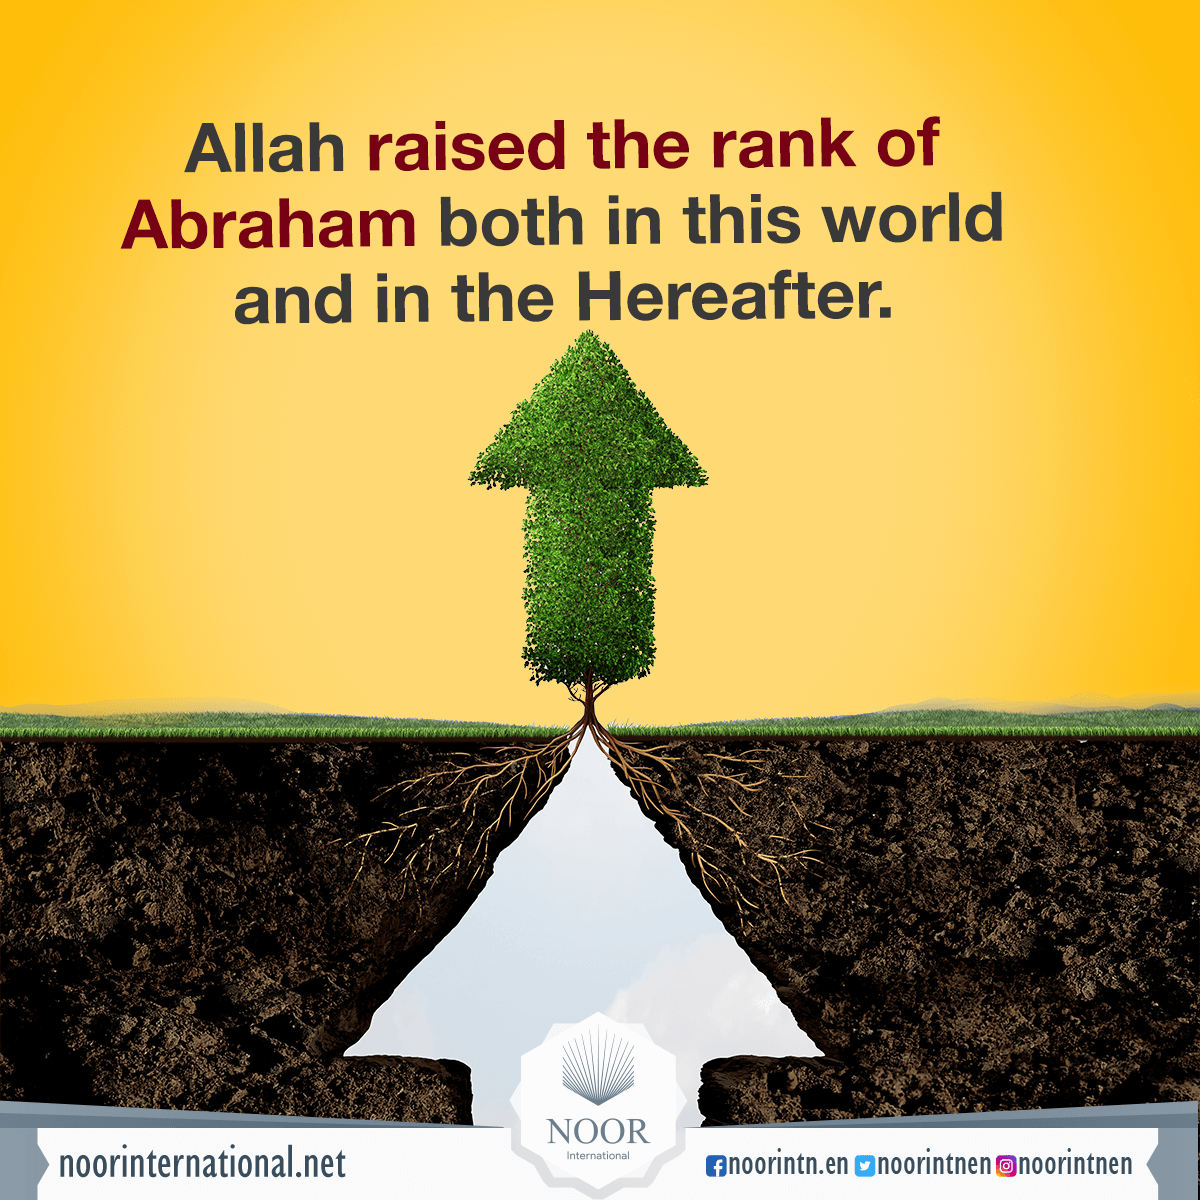 Allah raised the rank of Abraham both in this world and in the Hereafter.